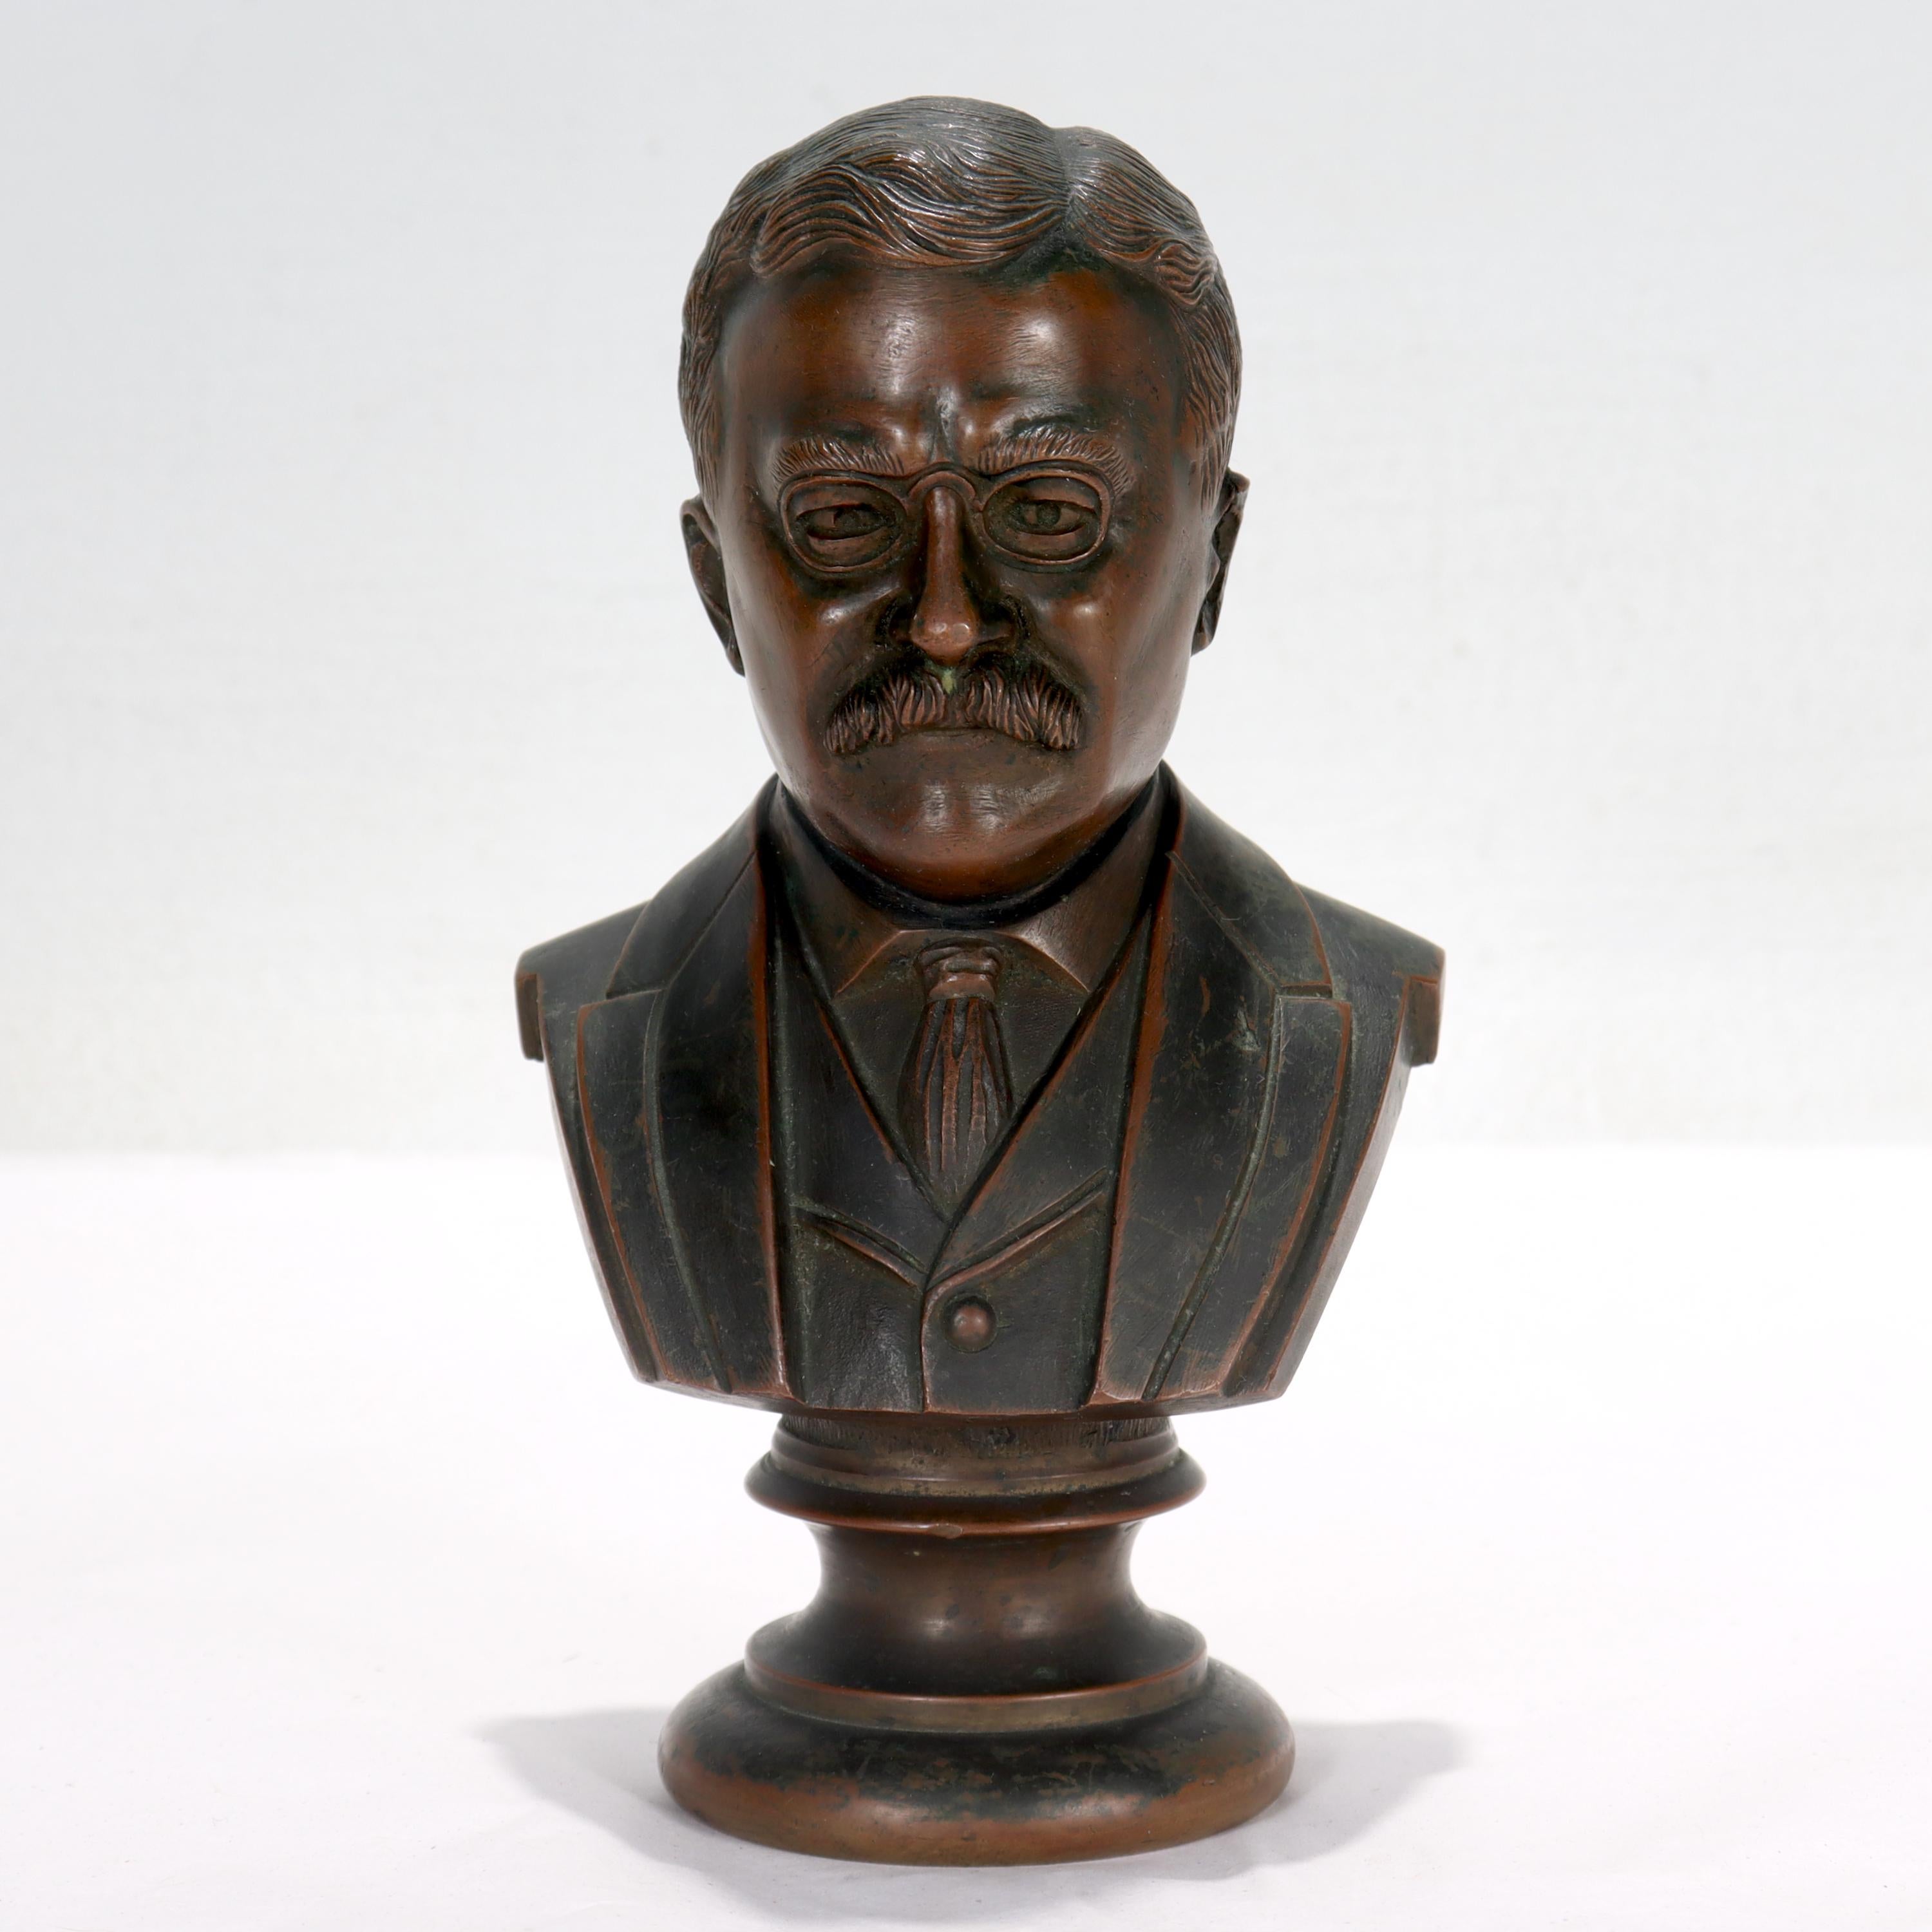 A fine old or antique desk sized bronze bust.

Depicting Theodore 